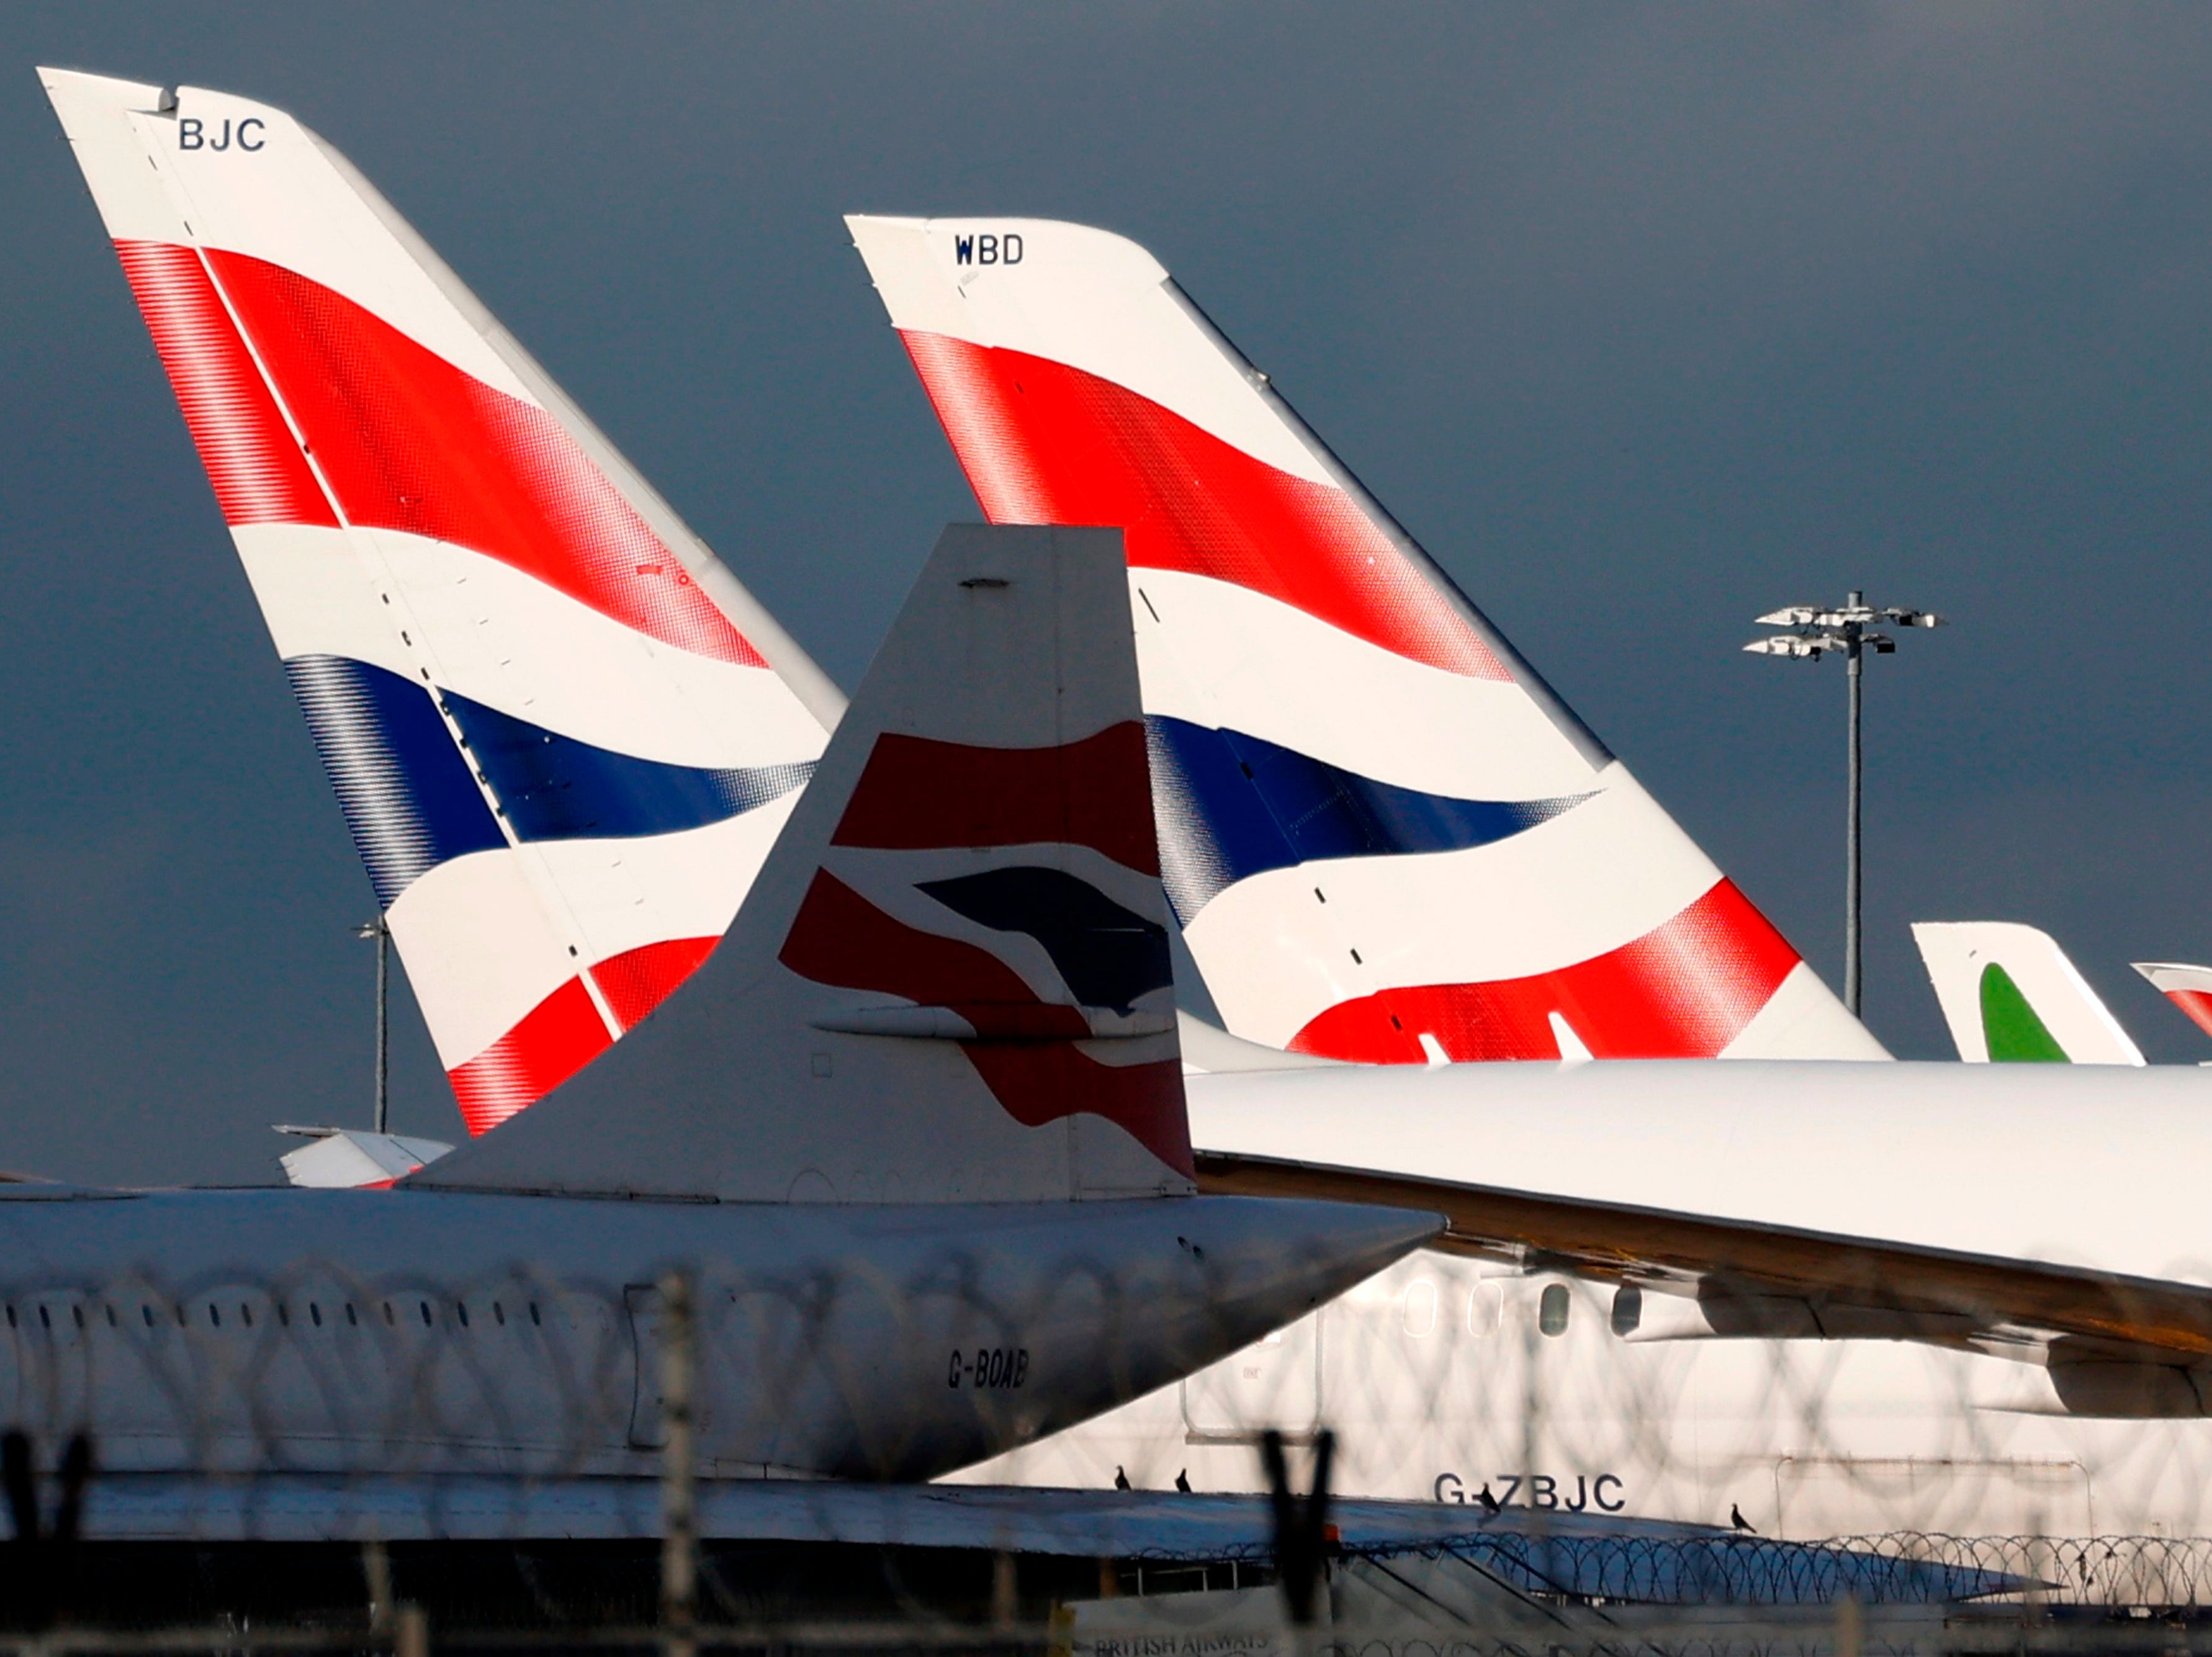 Heathrow says it is working with British Airways to reunite passengers with luggage